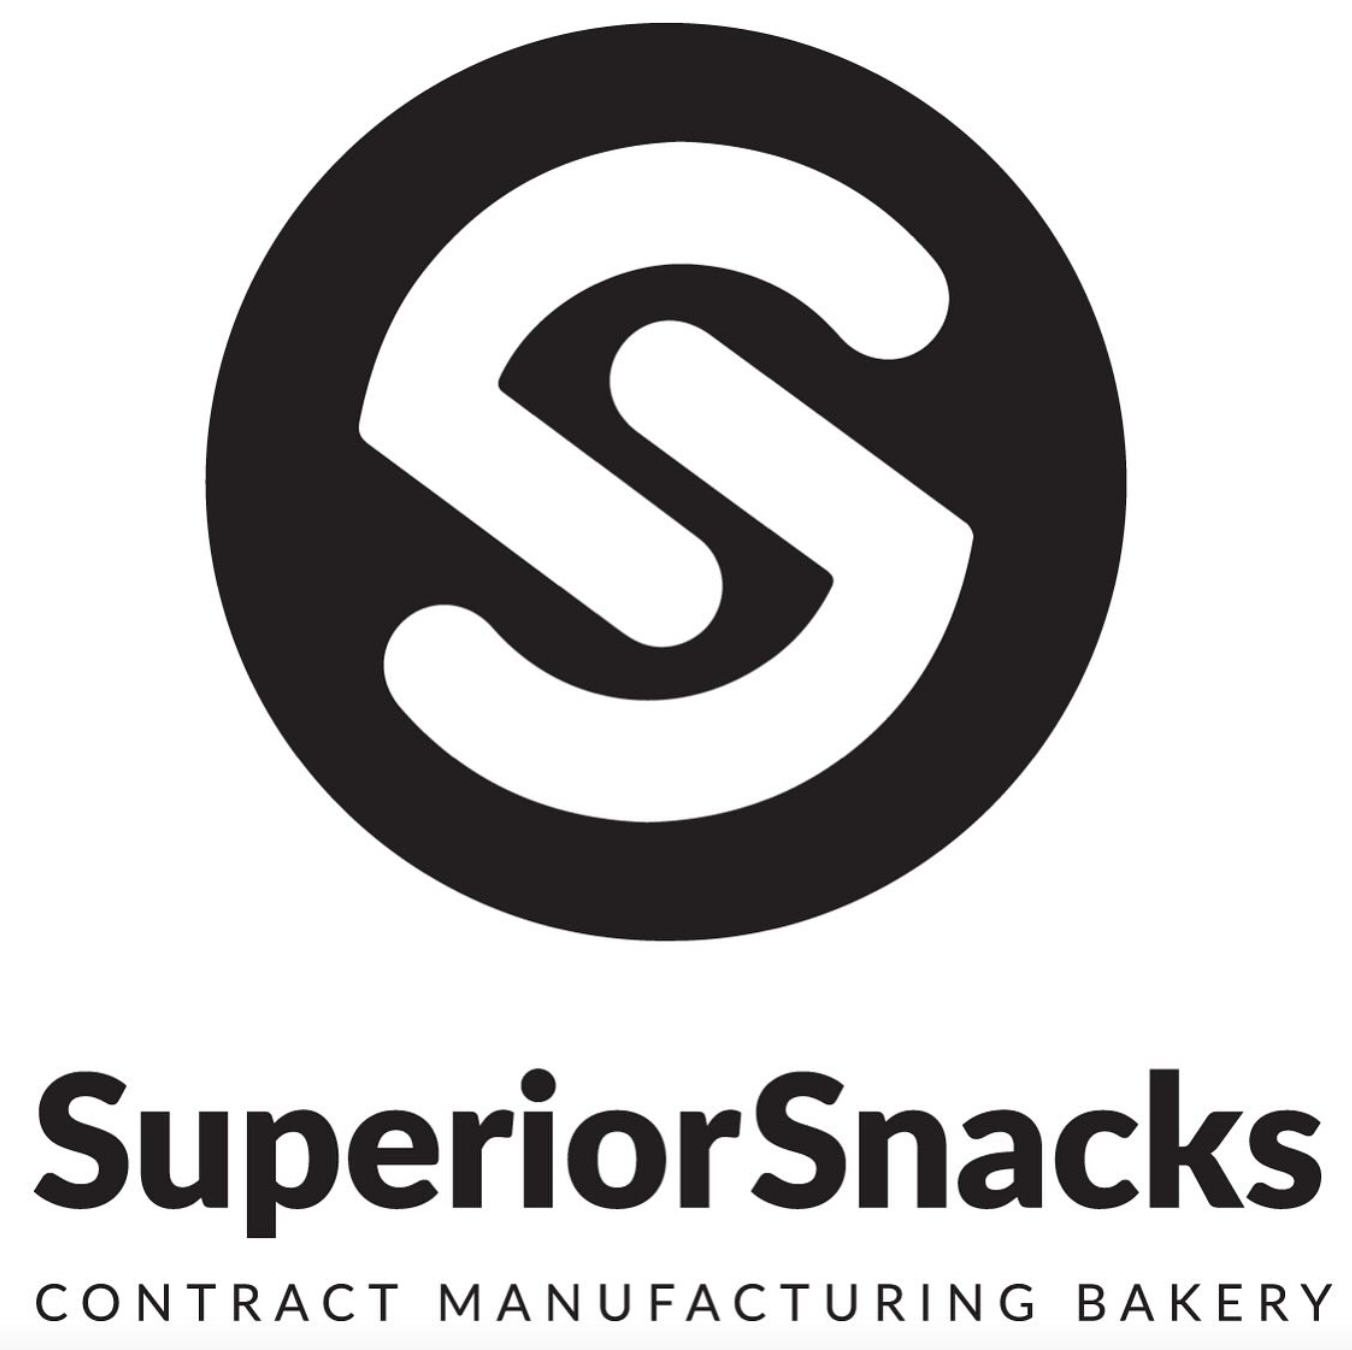 Logo of superior snacks, a contract manufacturing bakery, featuring a stylized 's' in a black circle.